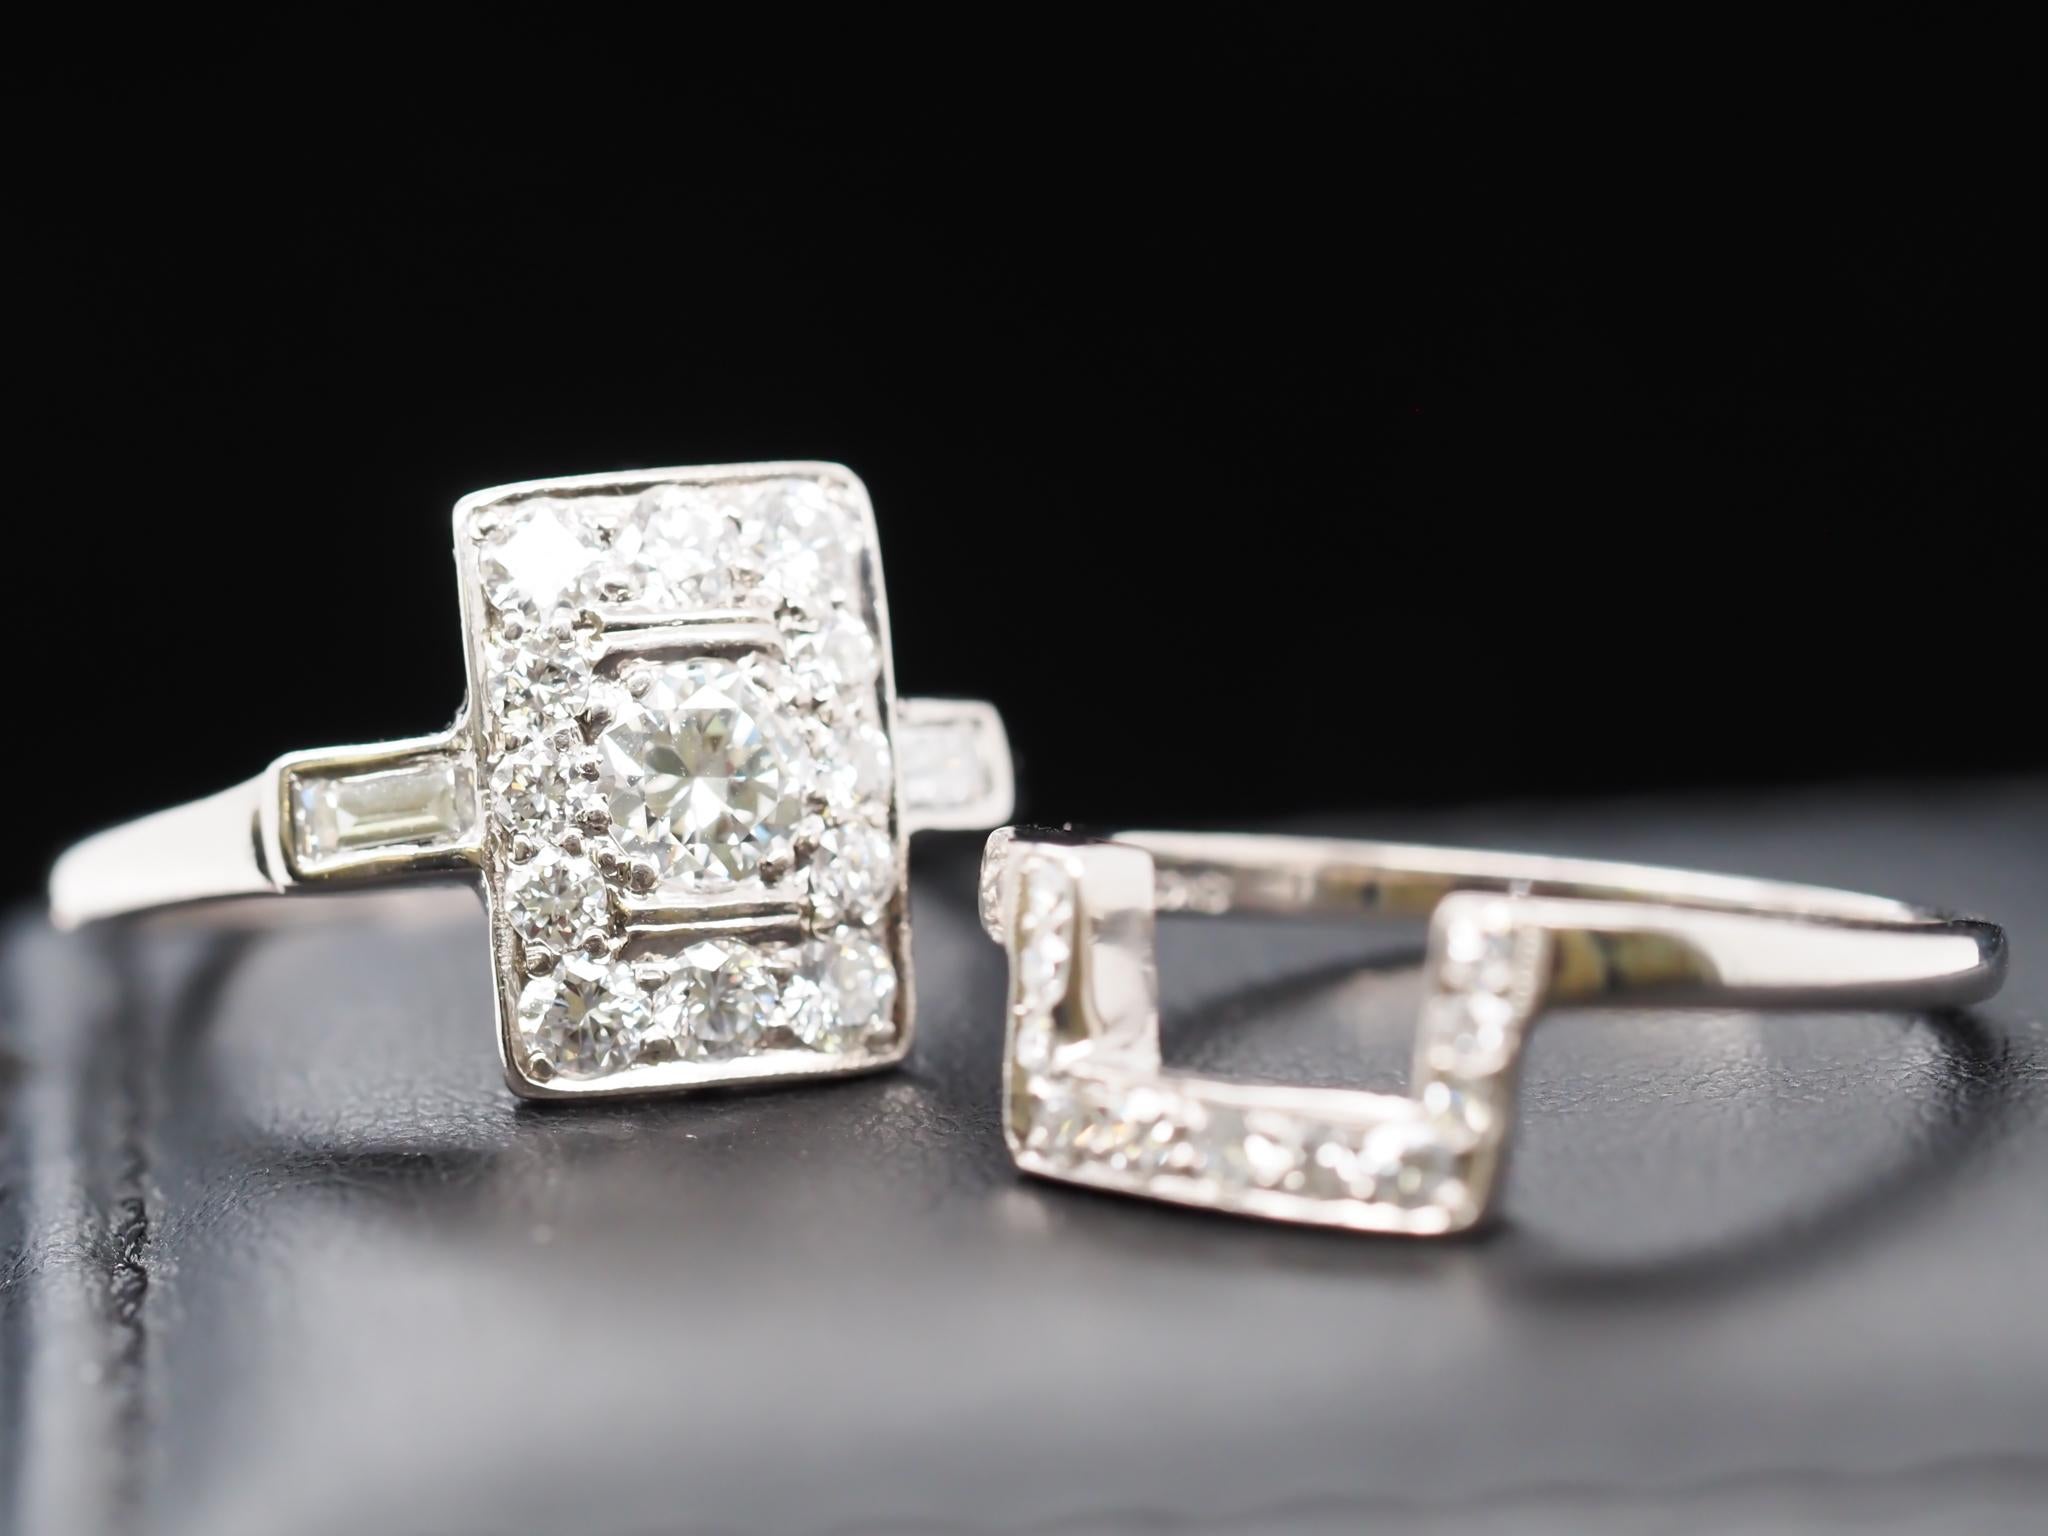 Year: 1940s

Item Details:
Ring Size: 6.75
Metal Type: 14K White Gold [Hallmarked, and Tested]
Weight: 7.6 grams

Diamond Details: .90ct, total weight. F-G Color, VS Clarity. Old European Brilliant Diamonds, Natural.

Band Width: 1.5mm